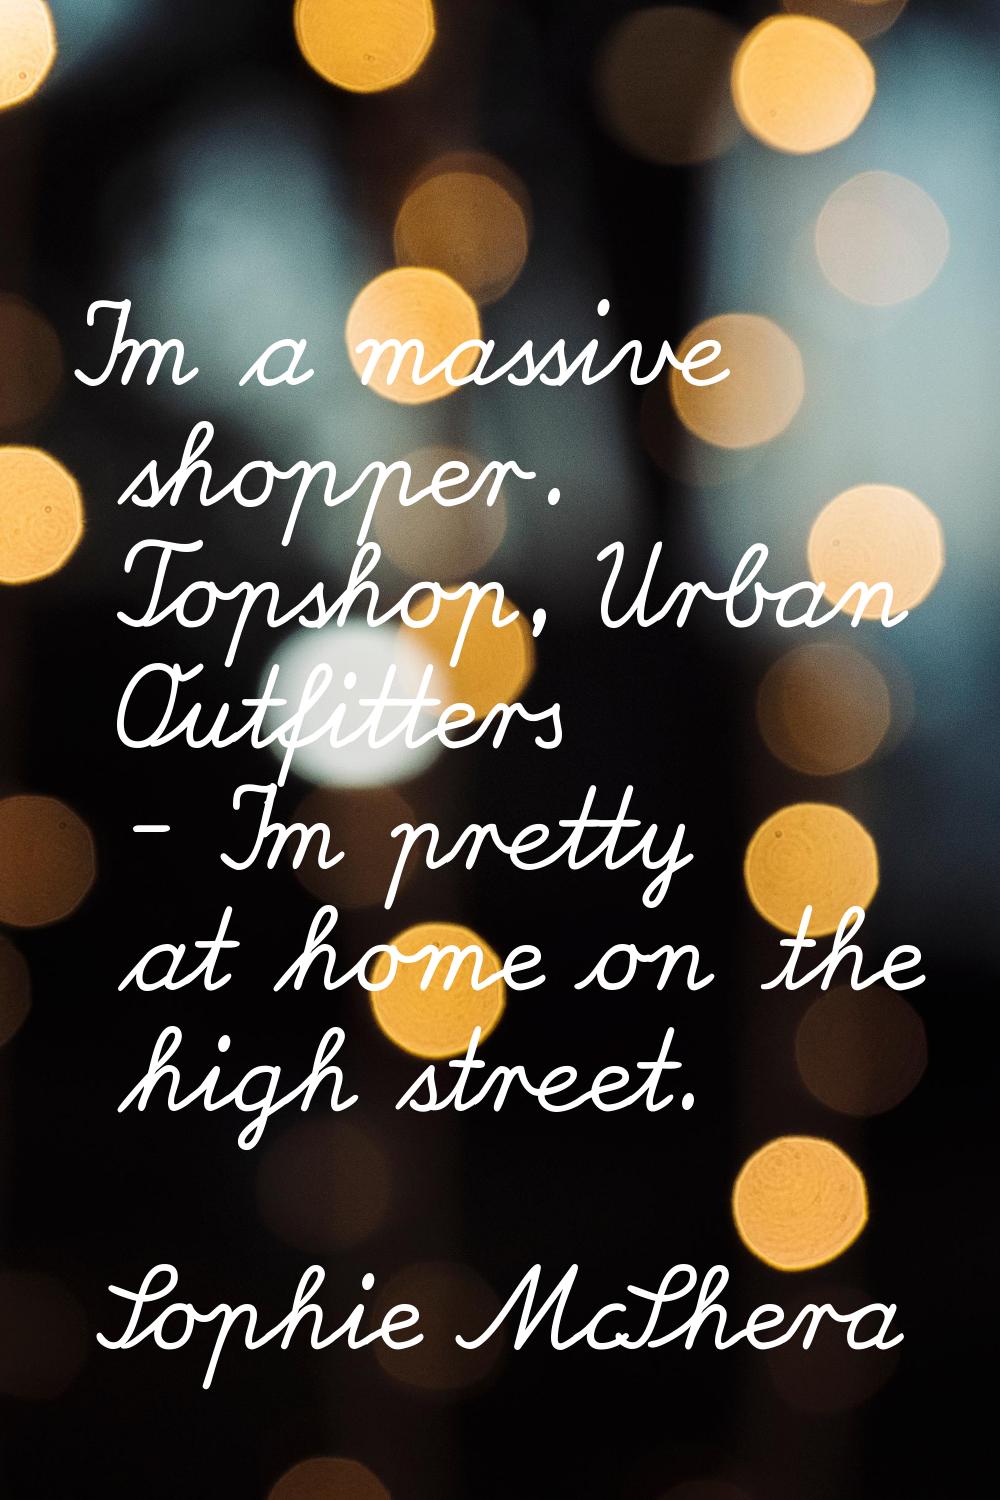 I'm a massive shopper. Topshop, Urban Outfitters - I'm pretty at home on the high street.